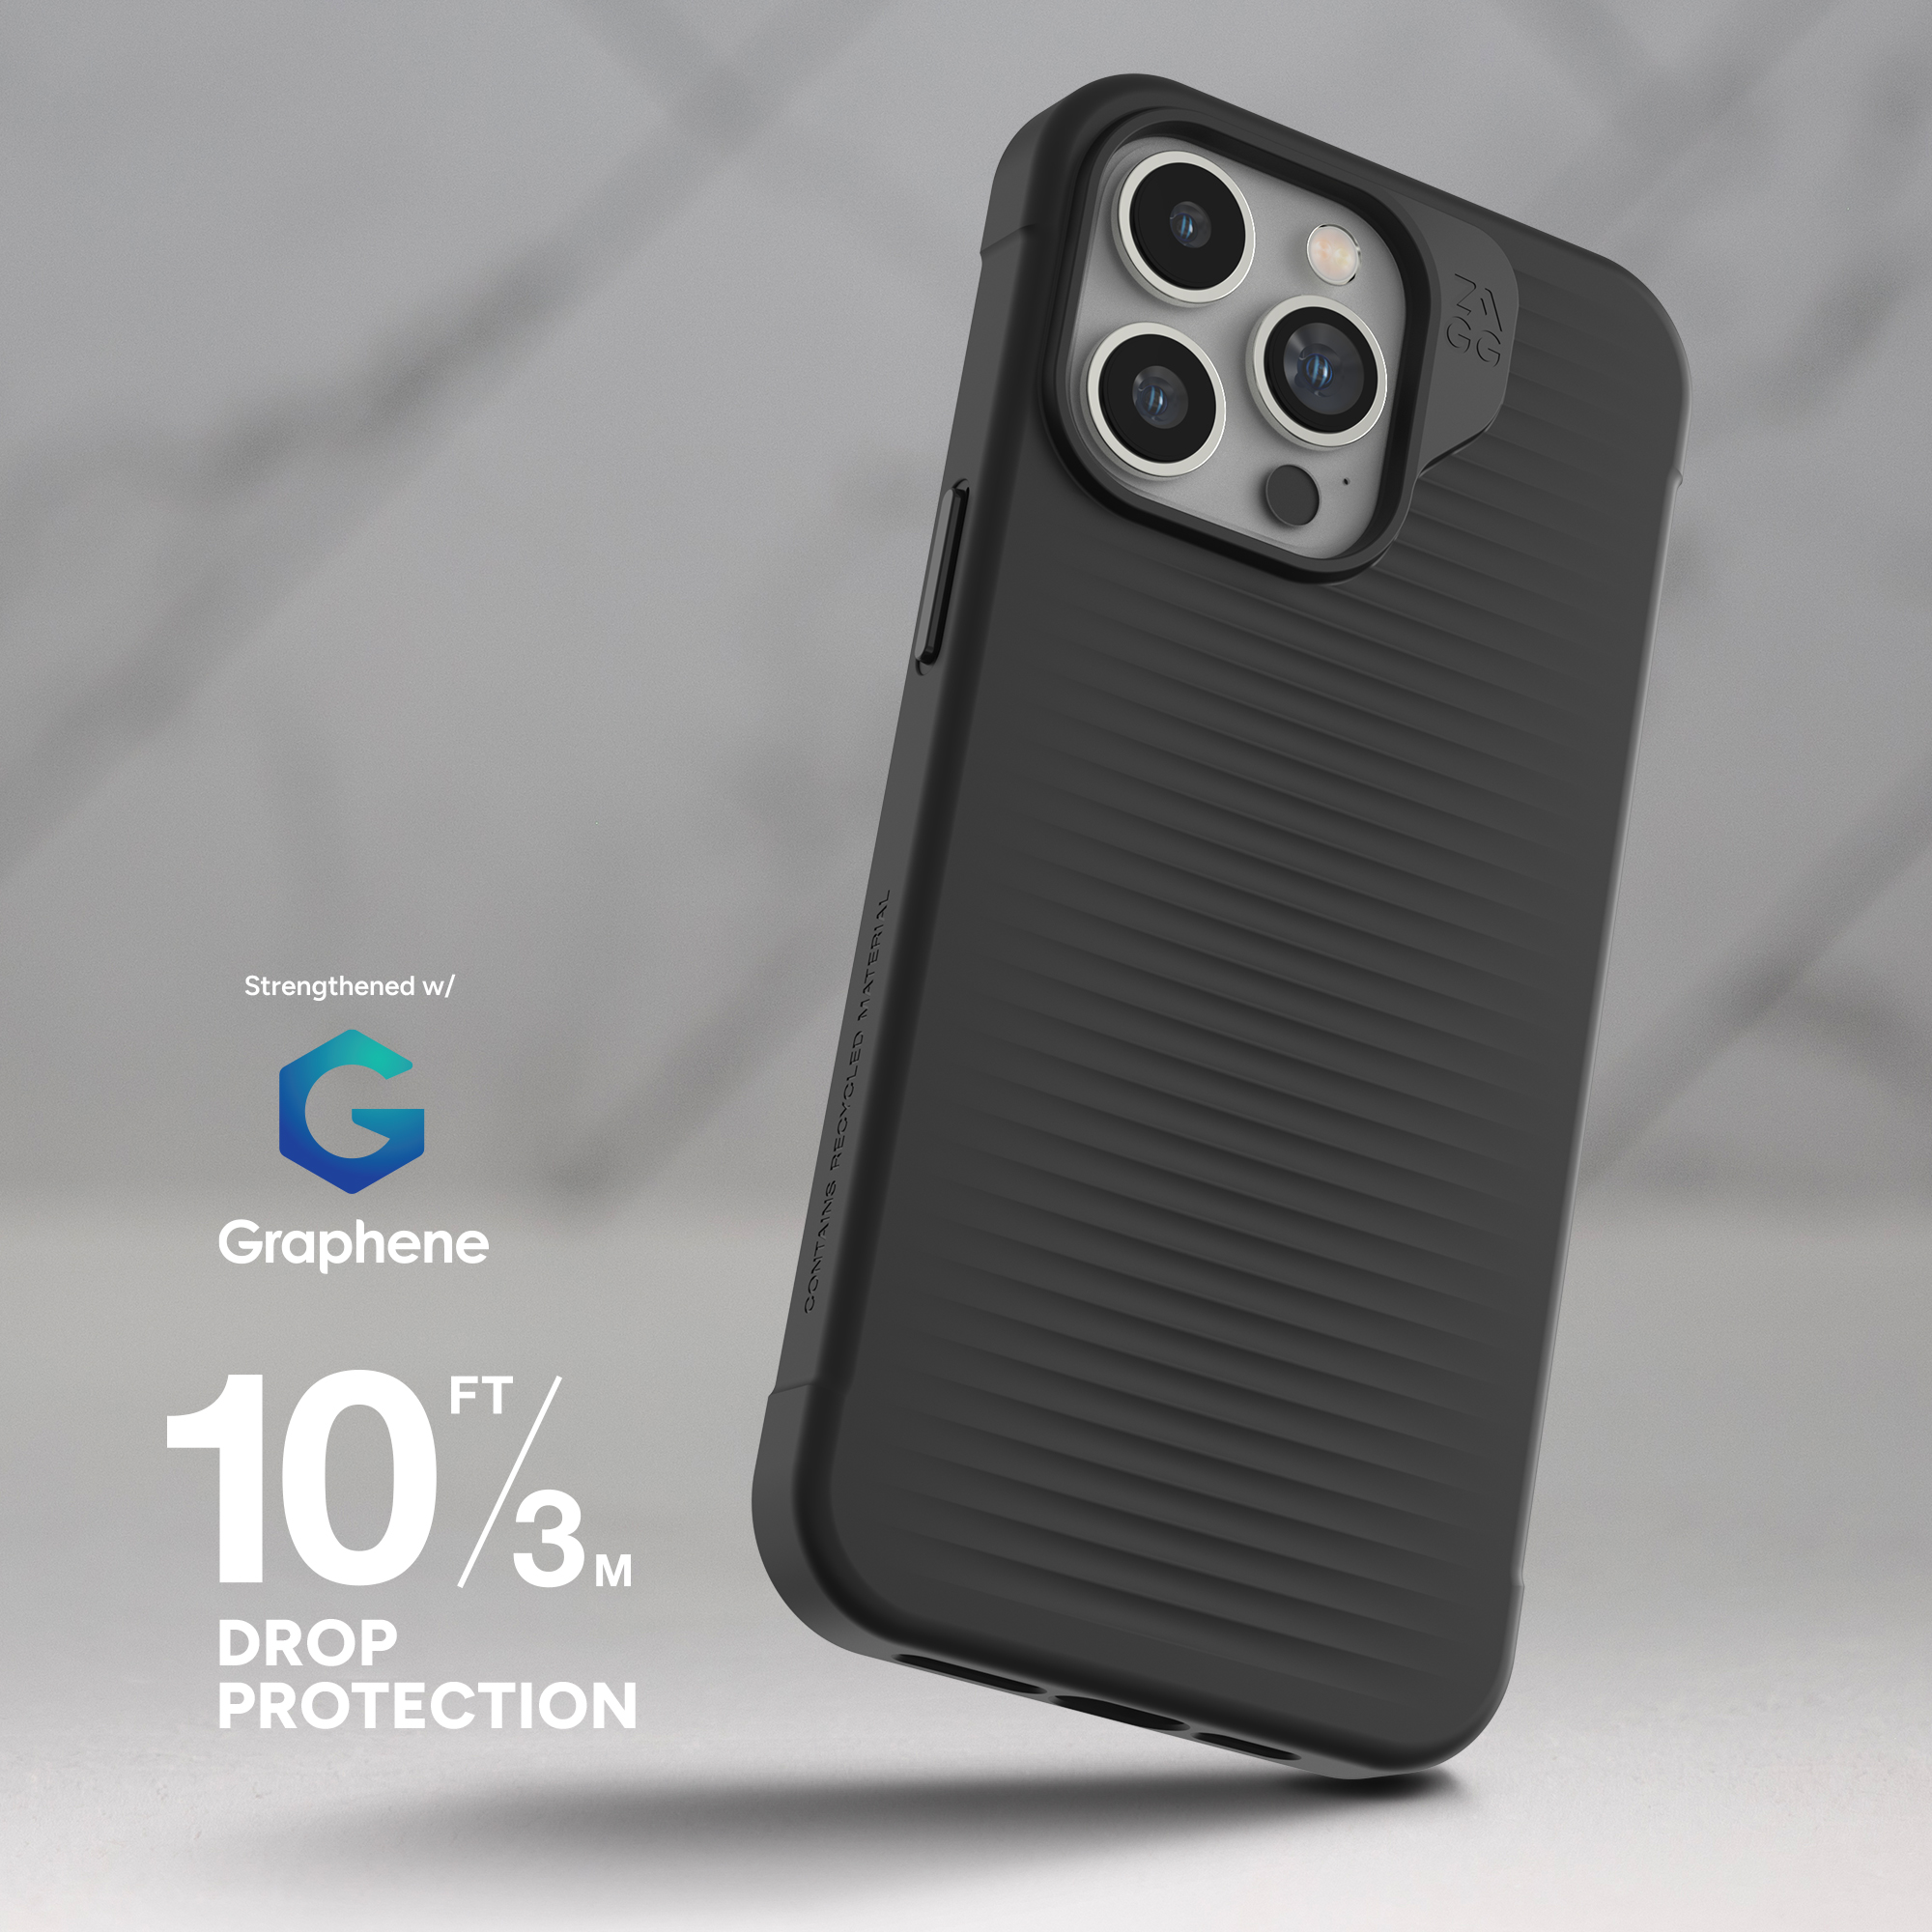 Drop Resistant up to 10ft│ 3m
|| Luxe protects your phone from drops up to 10 feet (3 meters). (1)